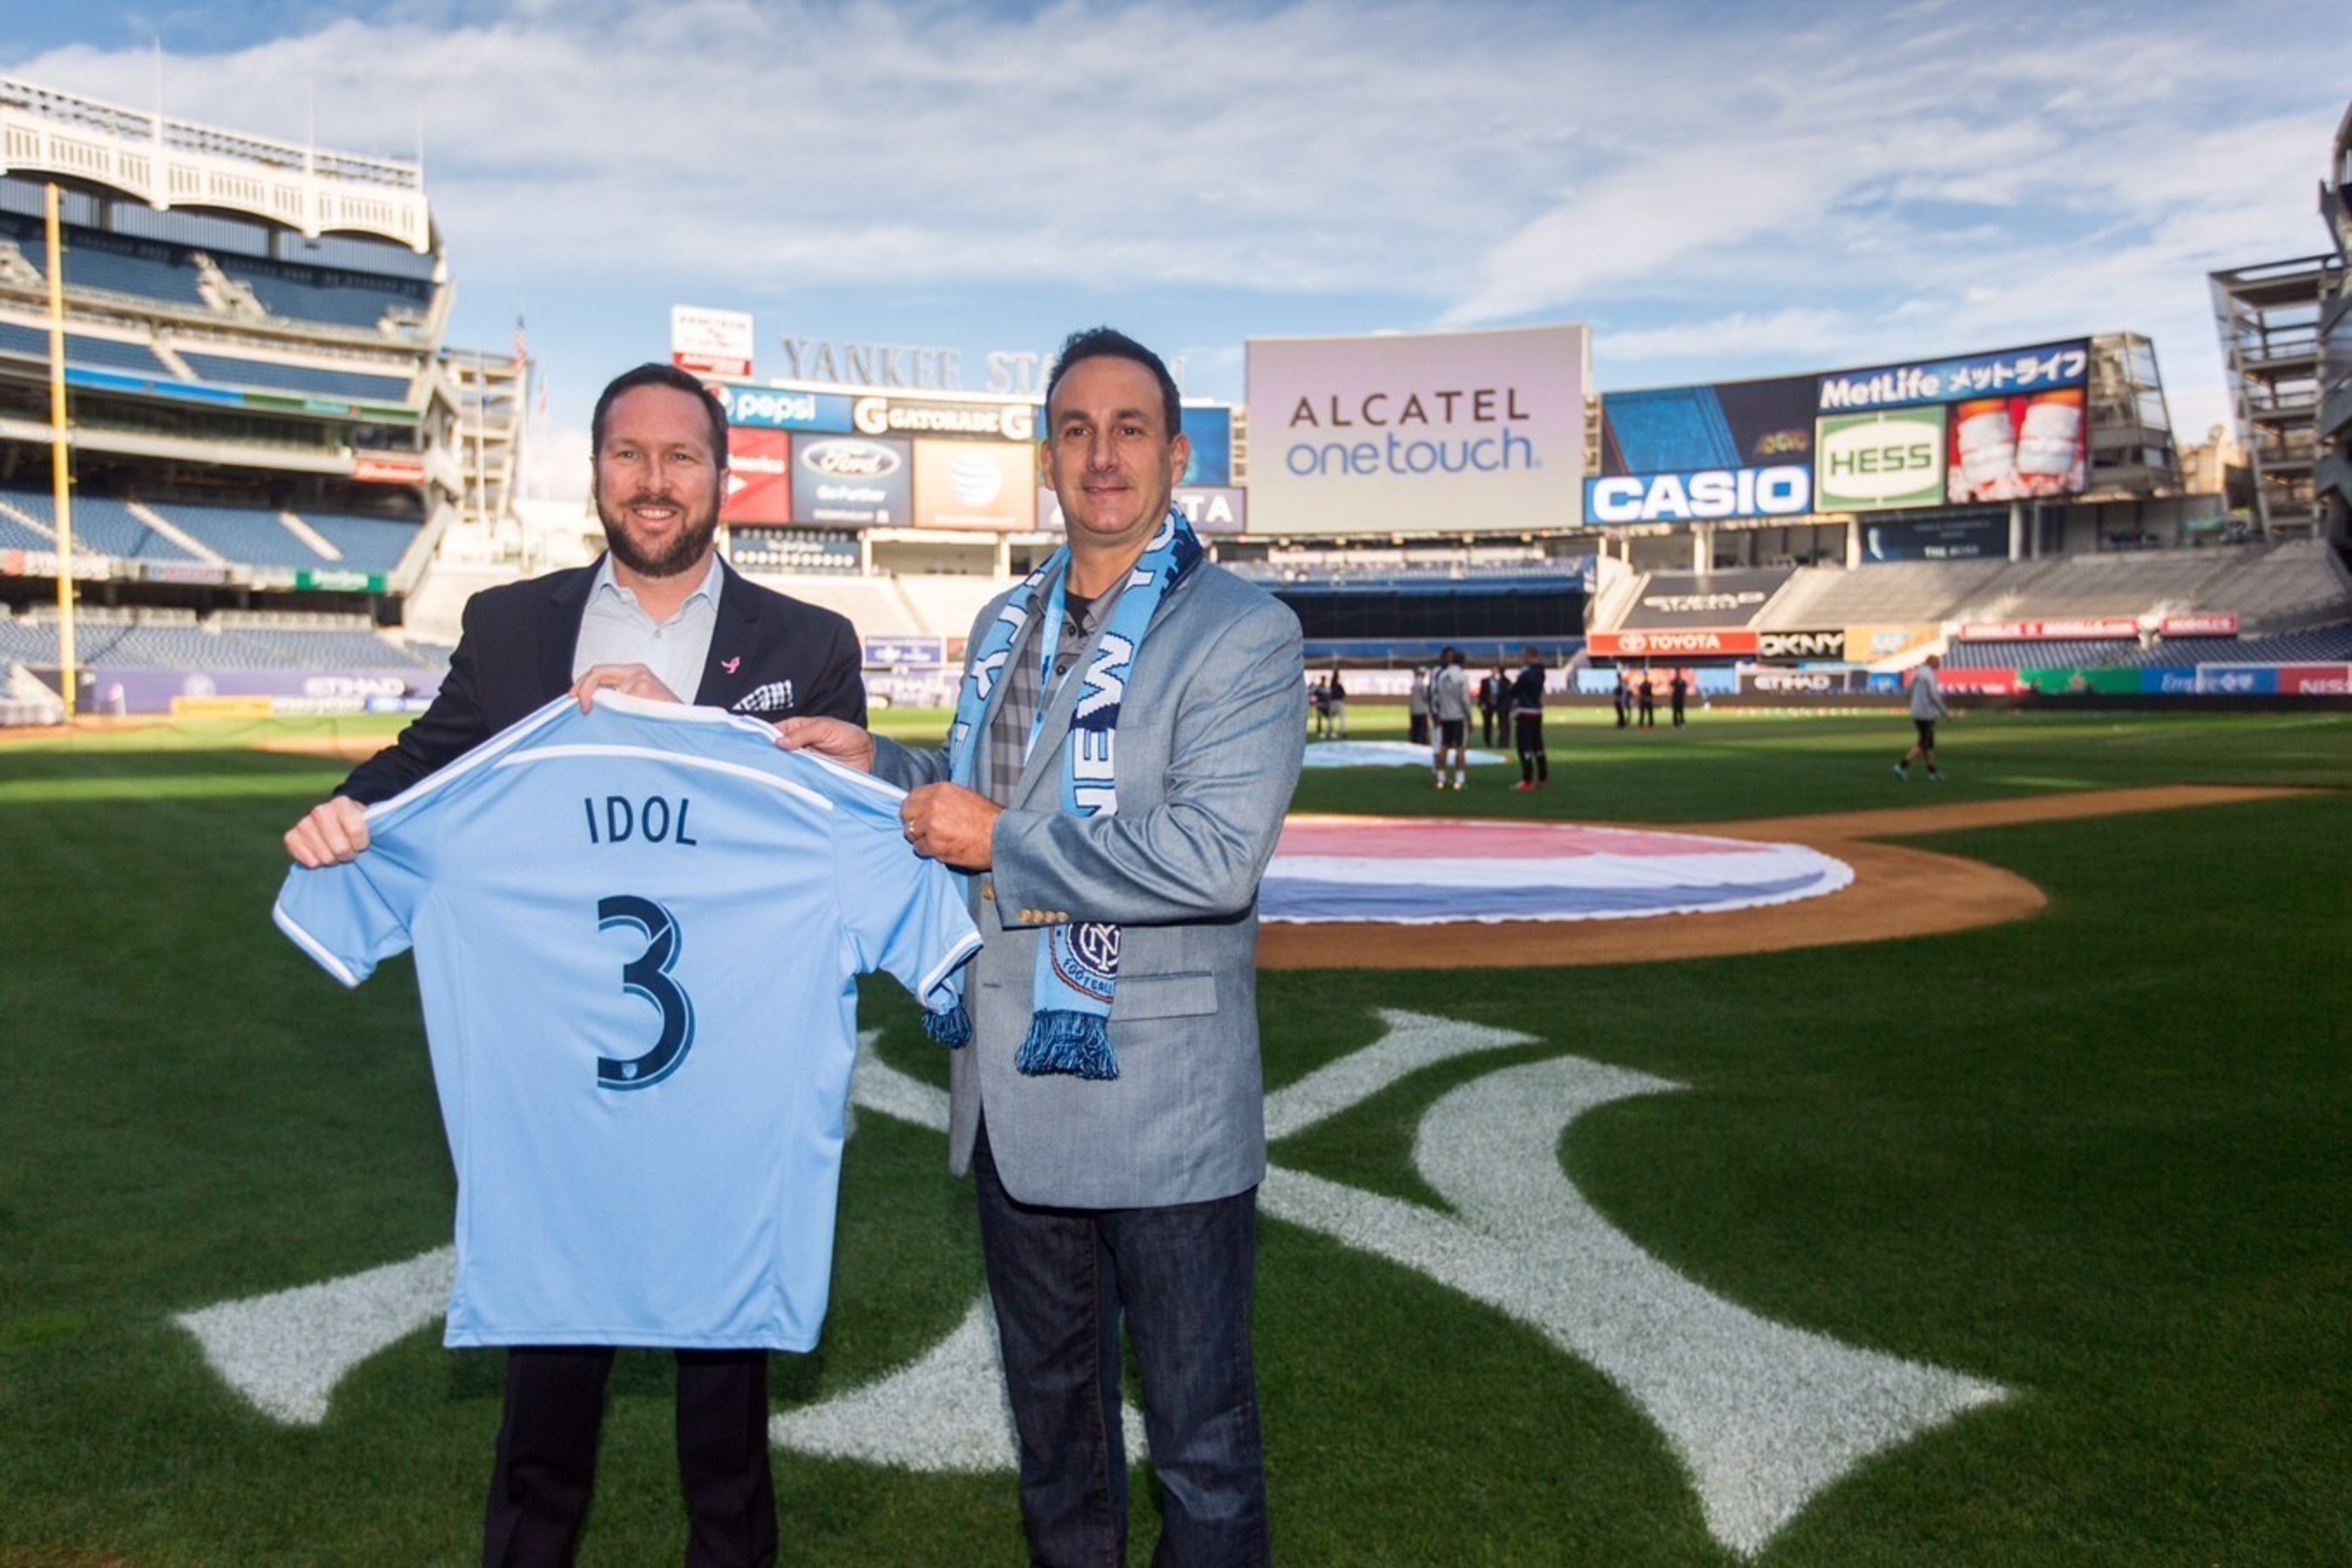 Steve Cistulli, Senior Vice President & General Manager of North America for ALCATEL ONETOUCH and Tom Glick, President of New York City FC announce ALCATEL ONETOUCH as the Official Smartphone Partner of New York City FC at Yankee Stadium on Sunday, October 25, 2015.